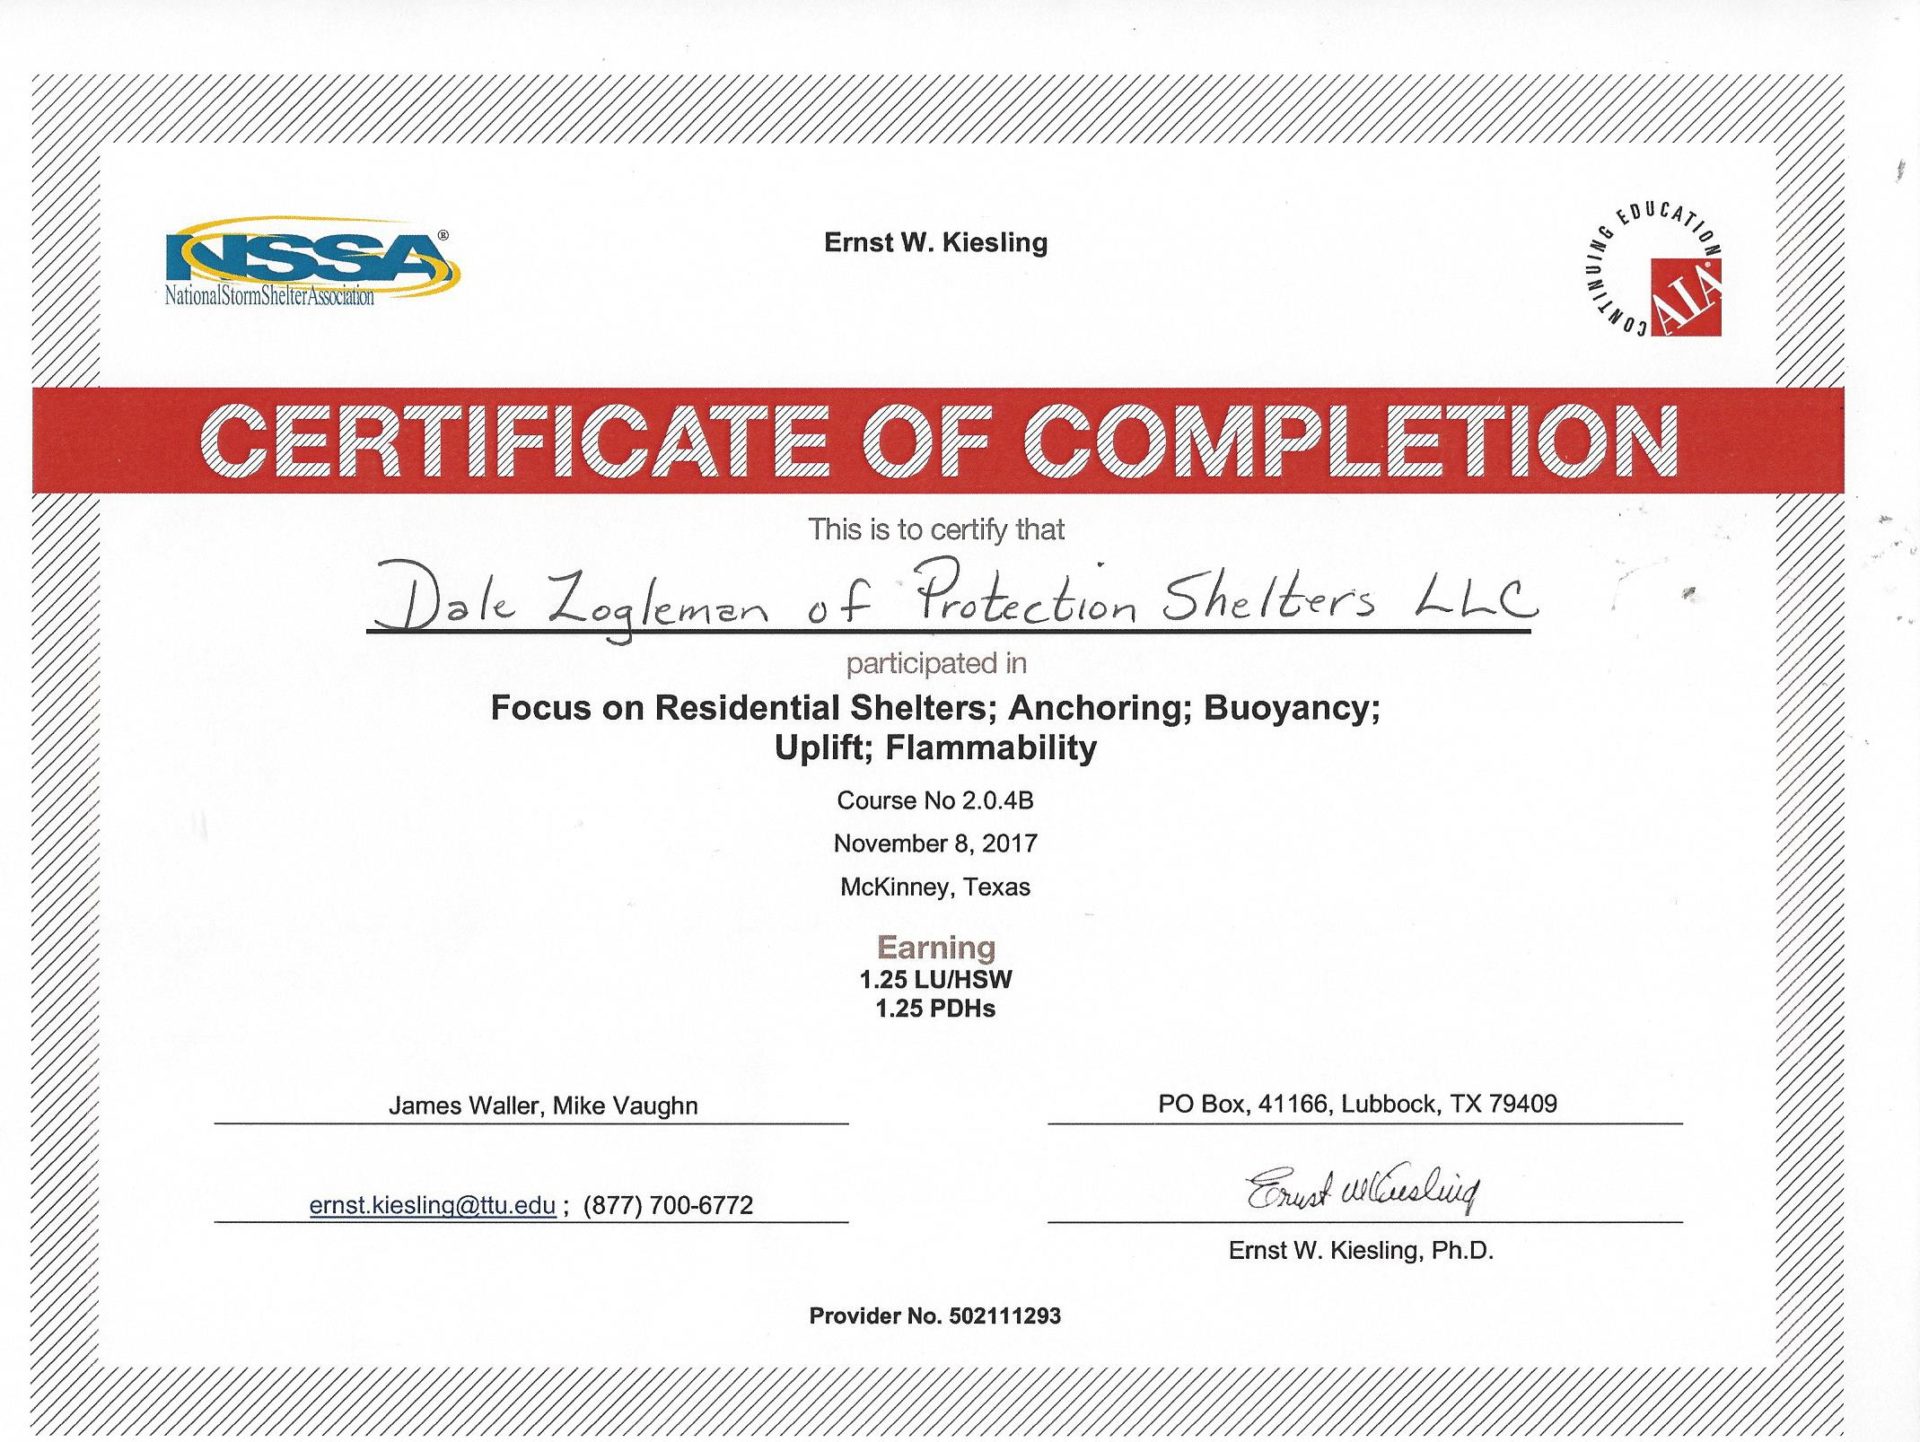 NSSA Certificates of Completion - Protection Shelters LLC.